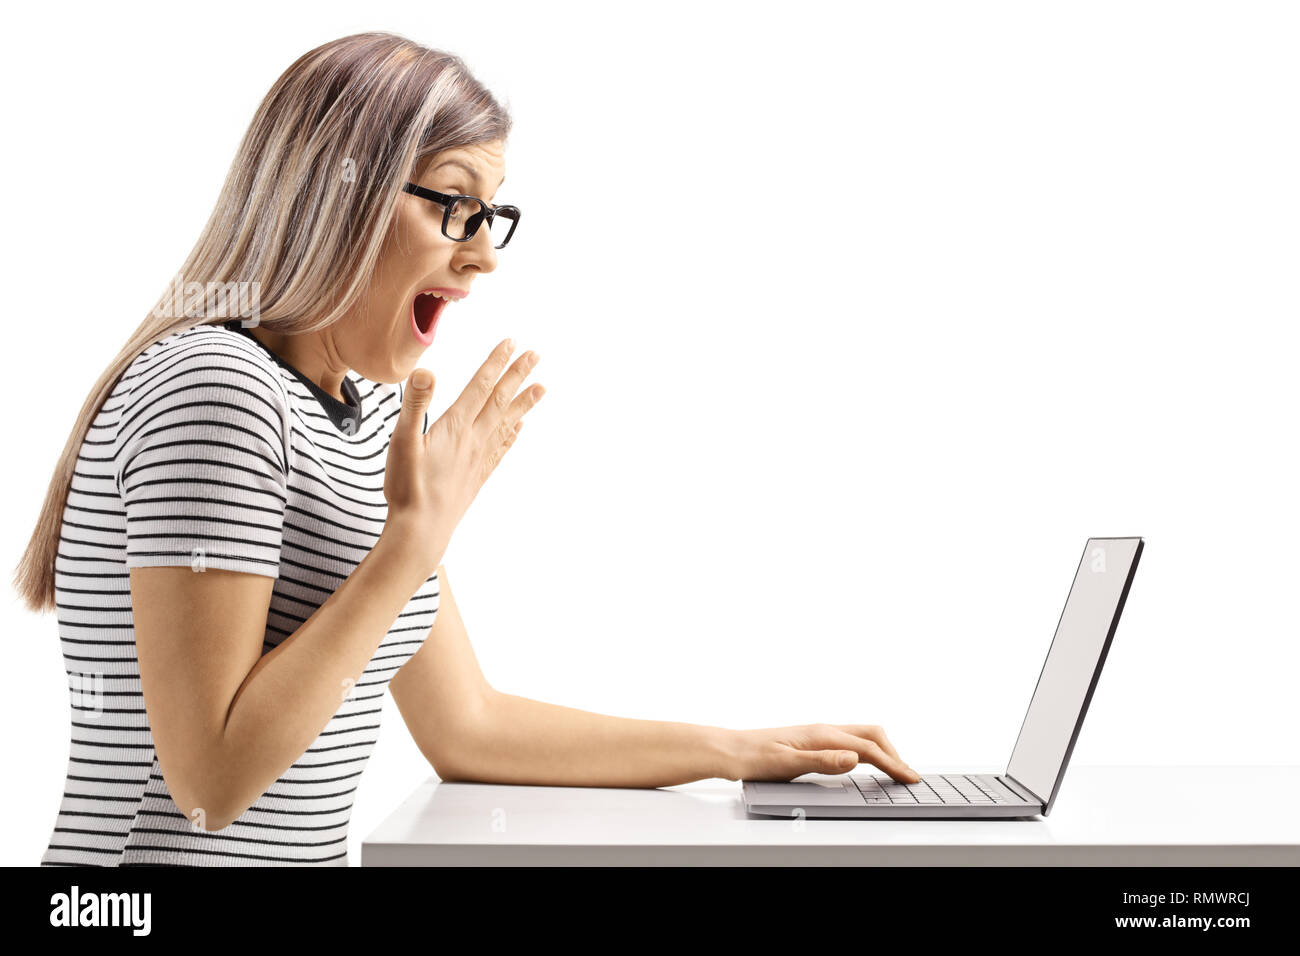 Surprised young woman looking at a laptop computer isolated on white background Stock Photo